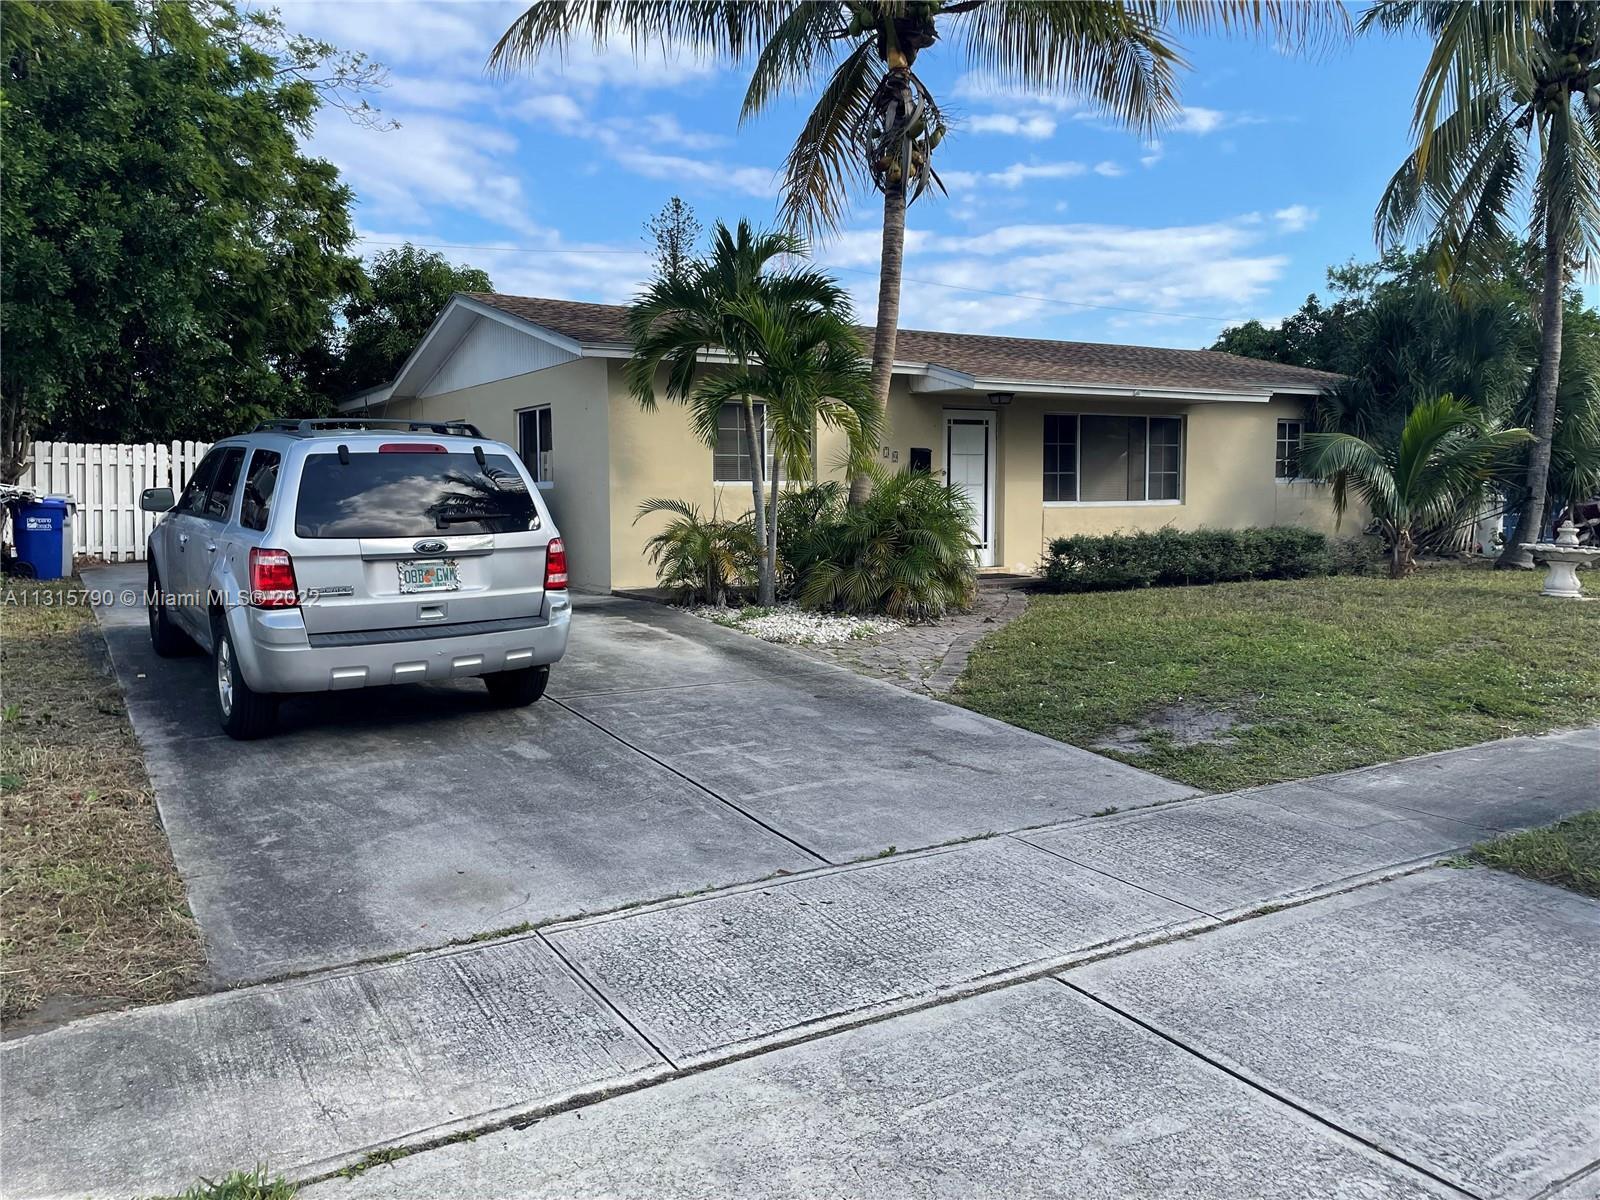 Great starter home with lots of potential. selling as is.  Located in Pompano Beach, close to the be